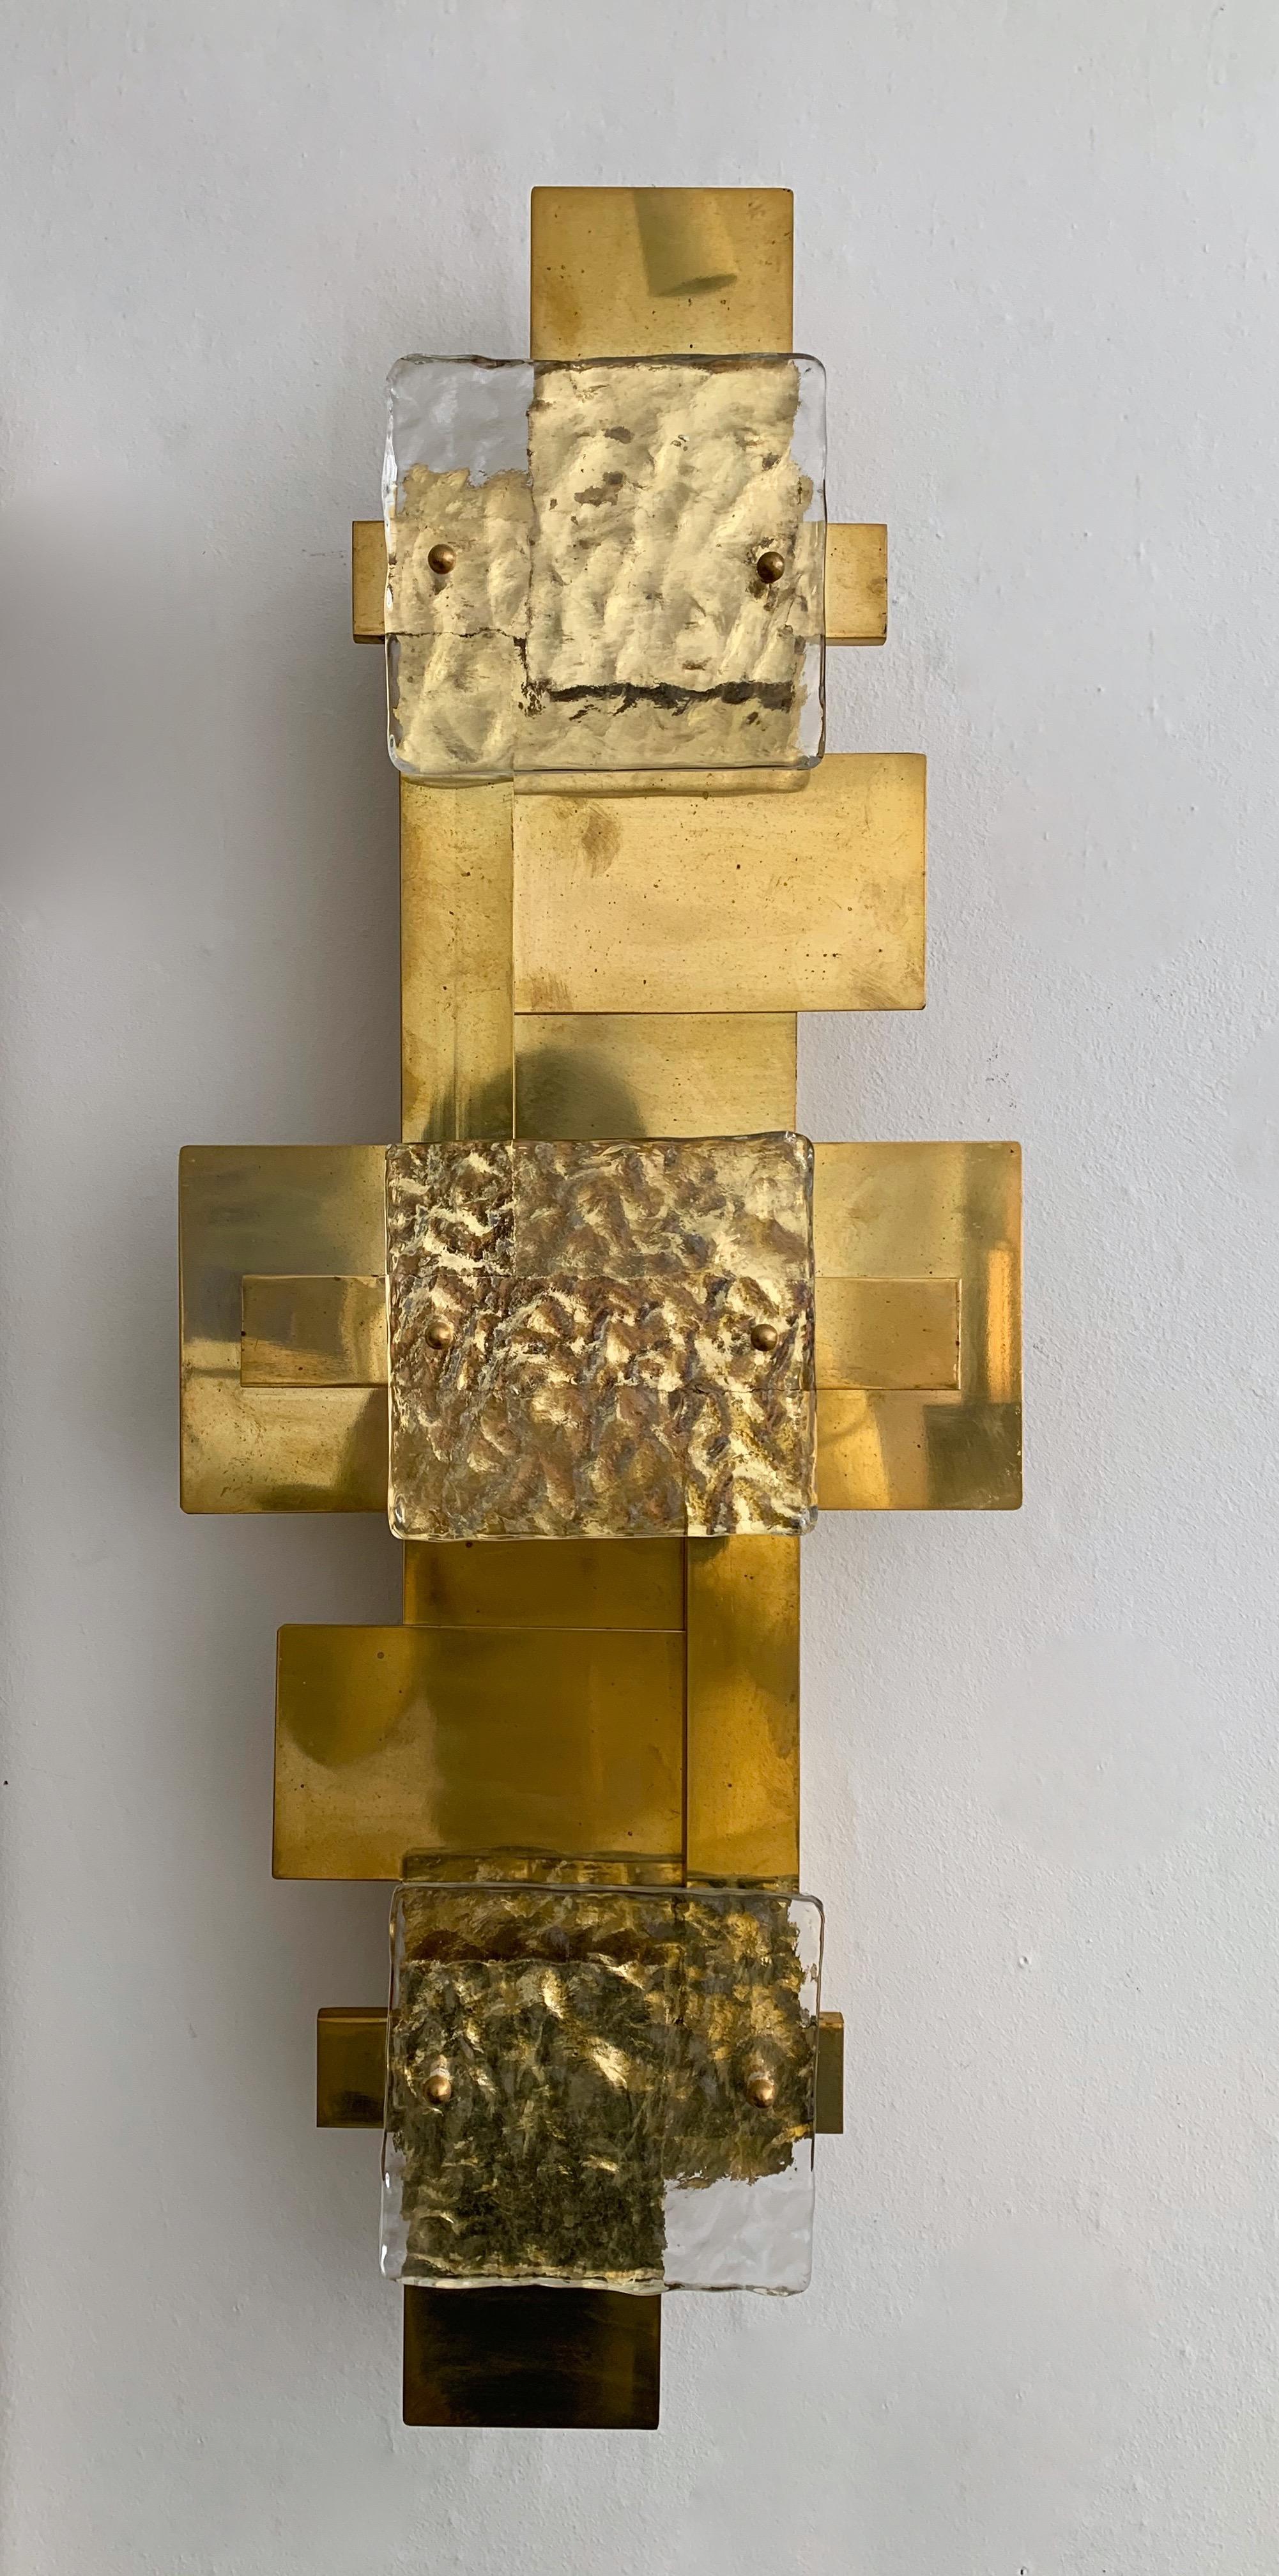 Pair of sconces wall lamps light panels or ceiling flushmount chandelier. Contemporary work, small Italian workshop, few exclusive production. Full brass and Murano glass. In the style of Reggiani, Sciolari, Palwa, Kinkeldey, Hollywood Regency,